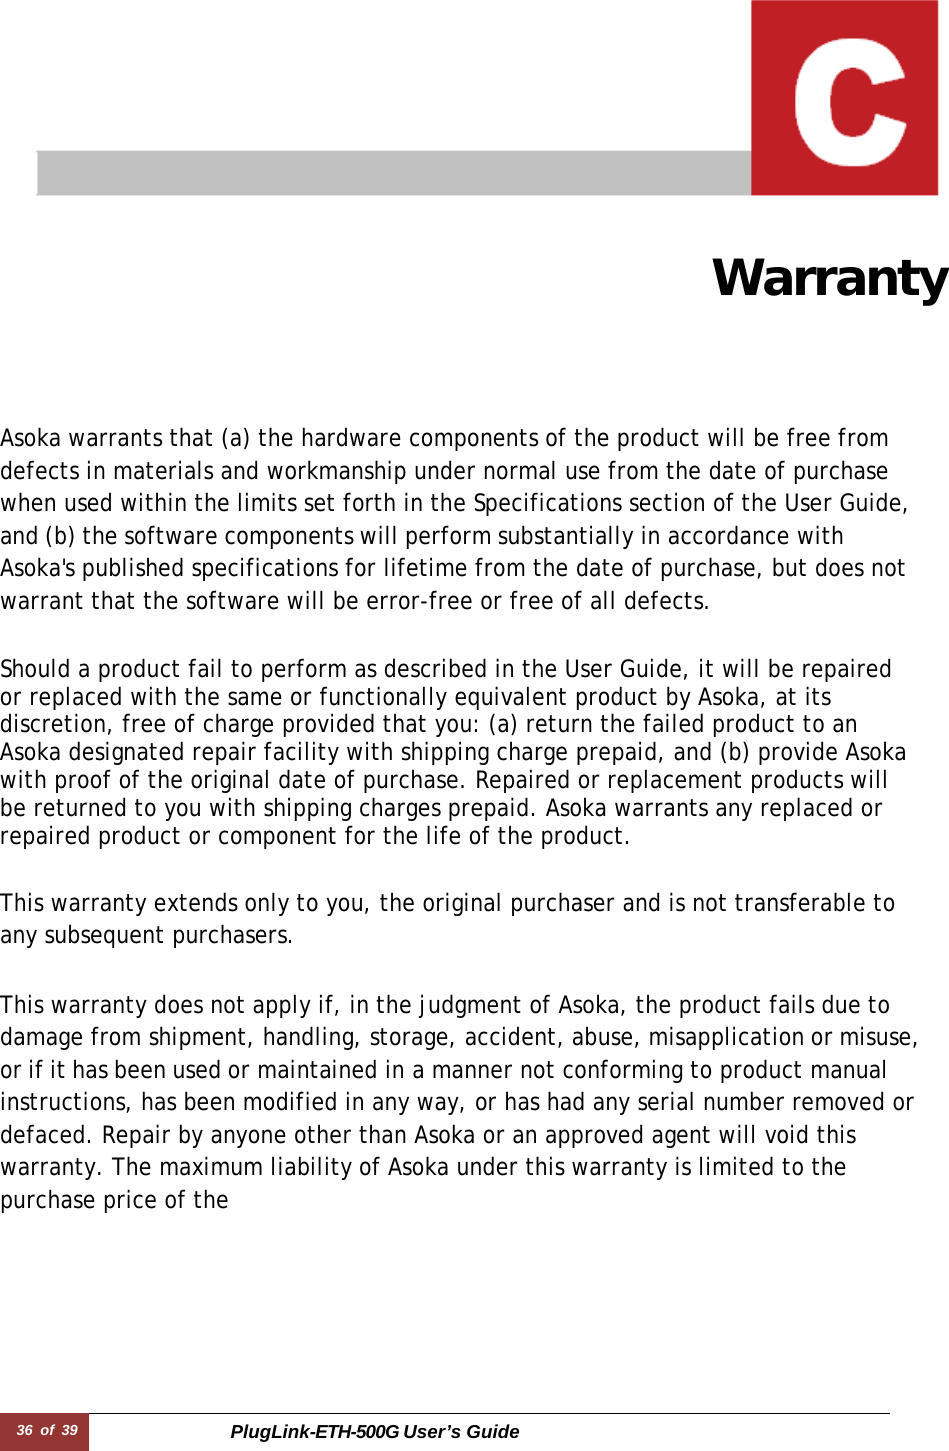 36 of 39 PlugLink-ETH-500G User’s Guide    Warranty Asoka warrants that (a) the hardware components of the product will be free from defects in materials and workmanship under normal use from the date of purchase when used within the limits set forth in the Specifications section of the User Guide, and (b) the software components will perform substantially in accordance with Asoka&apos;s published specifications for lifetime from the date of purchase, but does not warrant that the software will be error-free or free of all defects.  Should a product fail to perform as described in the User Guide, it will be repaired or replaced with the same or functionally equivalent product by Asoka, at its discretion, free of charge provided that you: (a) return the failed product to an Asoka designated repair facility with shipping charge prepaid, and (b) provide Asoka with proof of the original date of purchase. Repaired or replacement products will be returned to you with shipping charges prepaid. Asoka warrants any replaced or repaired product or component for the life of the product.   This warranty extends only to you, the original purchaser and is not transferable to any subsequent purchasers.  This warranty does not apply if, in the judgment of Asoka, the product fails due to damage from shipment, handling, storage, accident, abuse, misapplication or misuse, or if it has been used or maintained in a manner not conforming to product manual instructions, has been modified in any way, or has had any serial number removed or defaced. Repair by anyone other than Asoka or an approved agent will void this warranty. The maximum liability of Asoka under this warranty is limited to the purchase price of the 